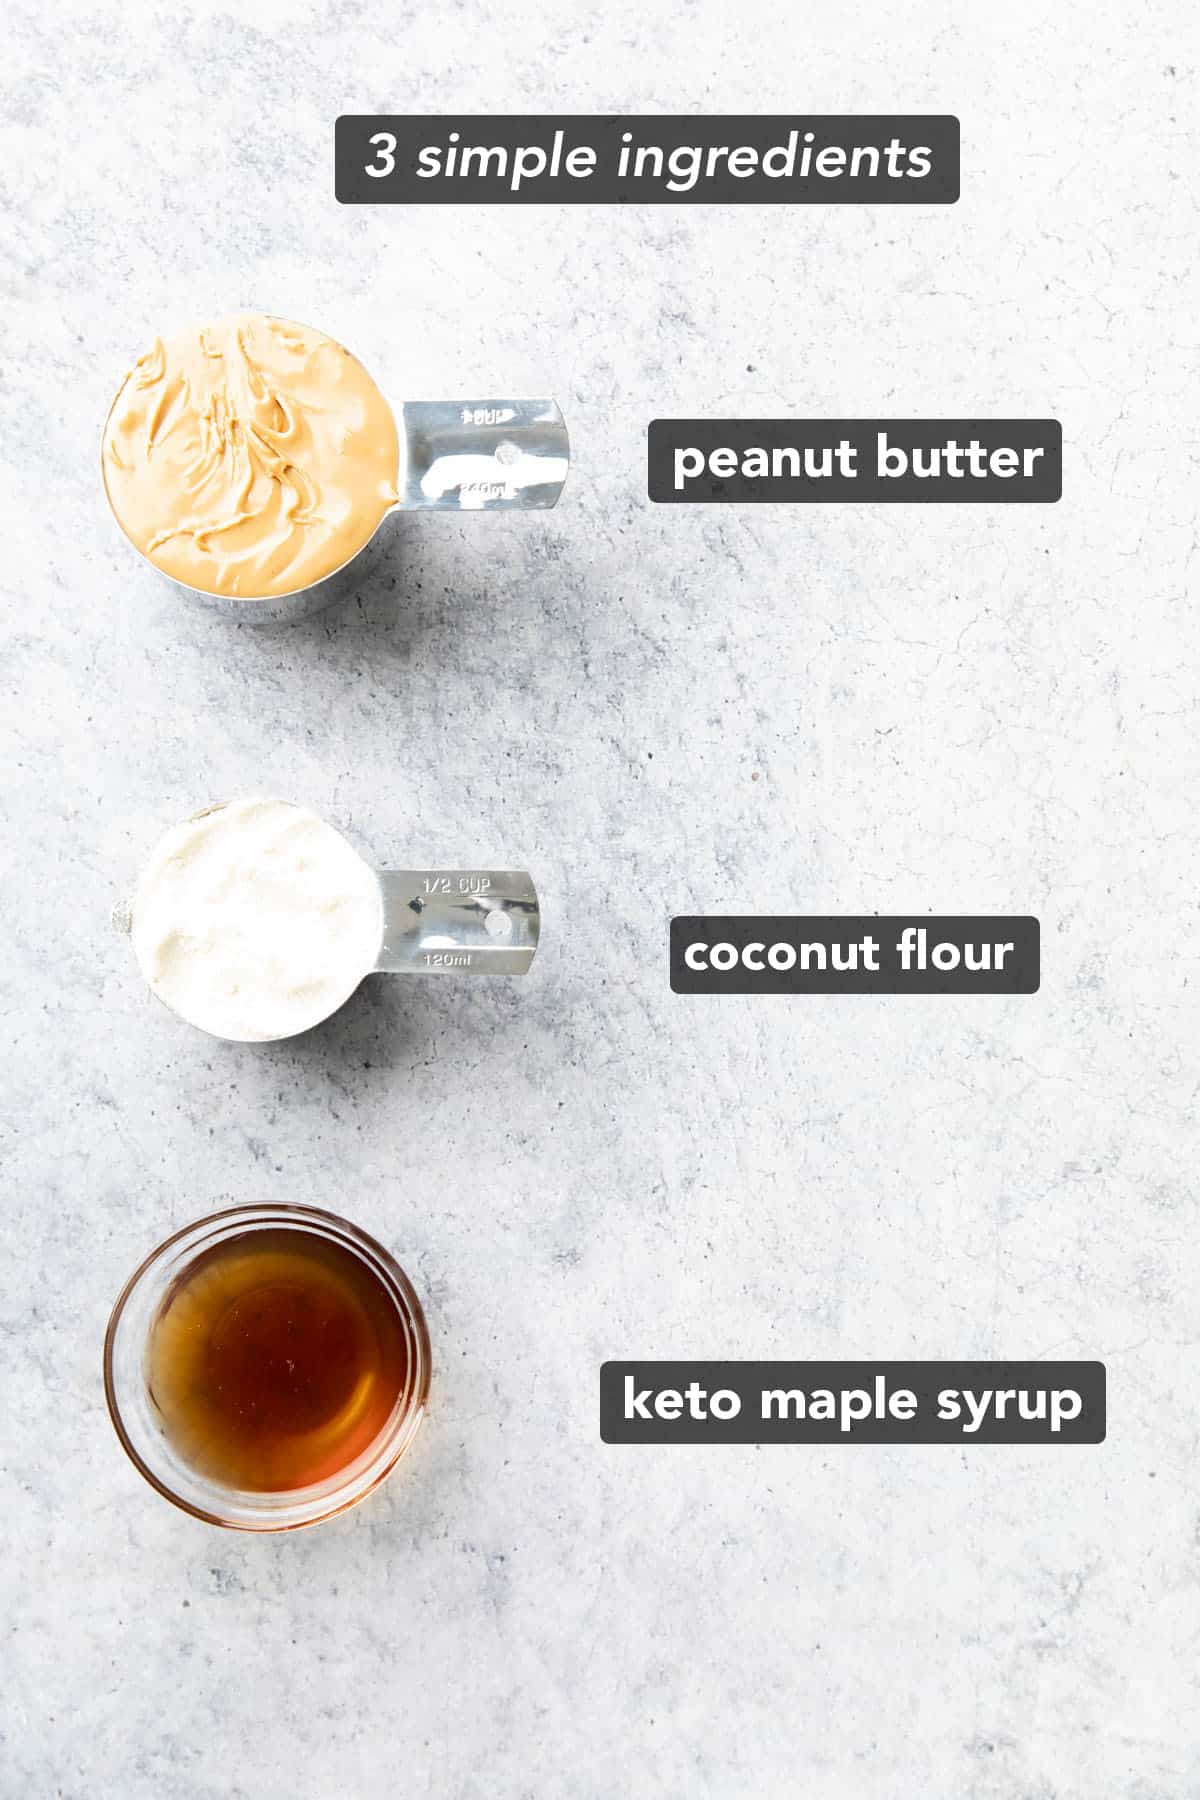 ingredients for keto peanut butter balls pre-measured and laid out